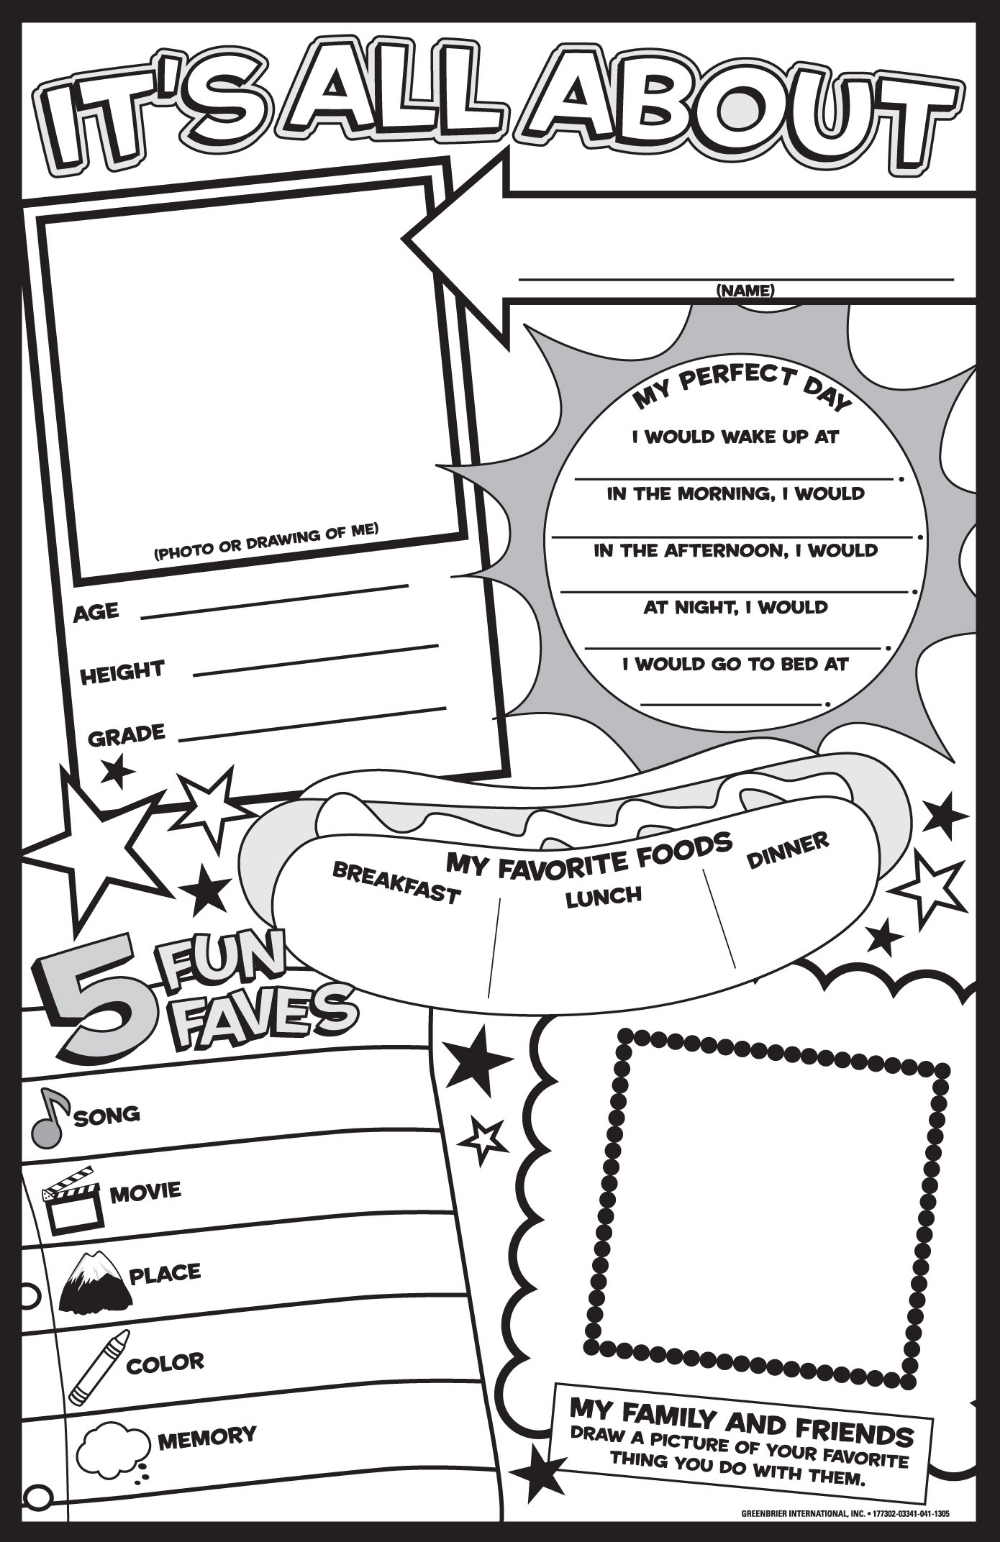 All about me coloring page all about me worksheet all about me poster about me poster